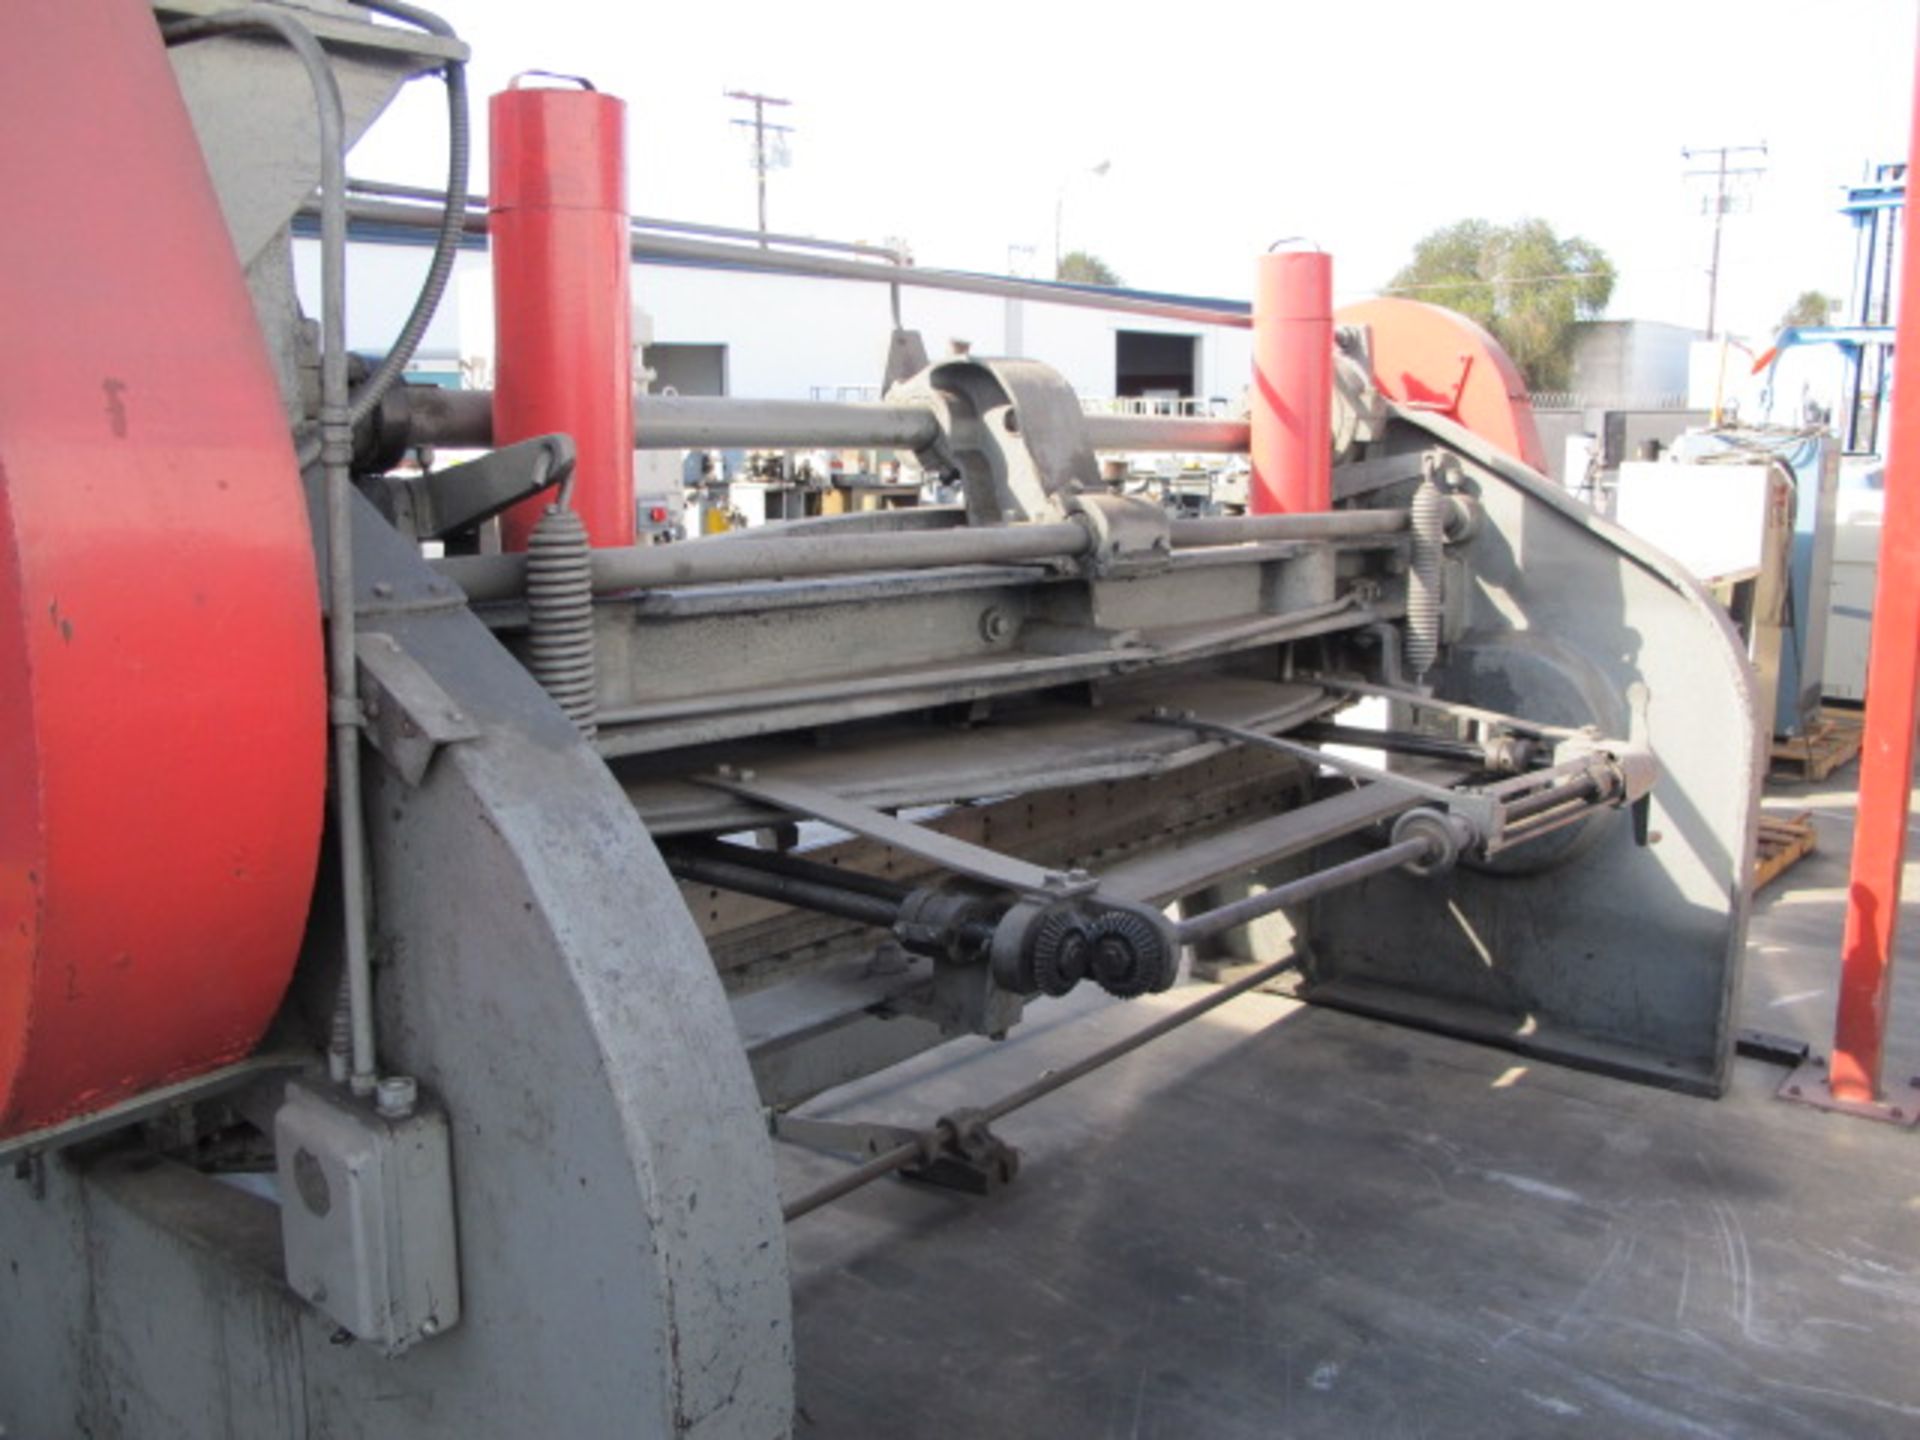 Bertsch & Co. 10' Deep Throat Power Shear s/n 7441 w/ Manual Back Gage, 25" Throat, 33 1/2"Supports - Image 4 of 6